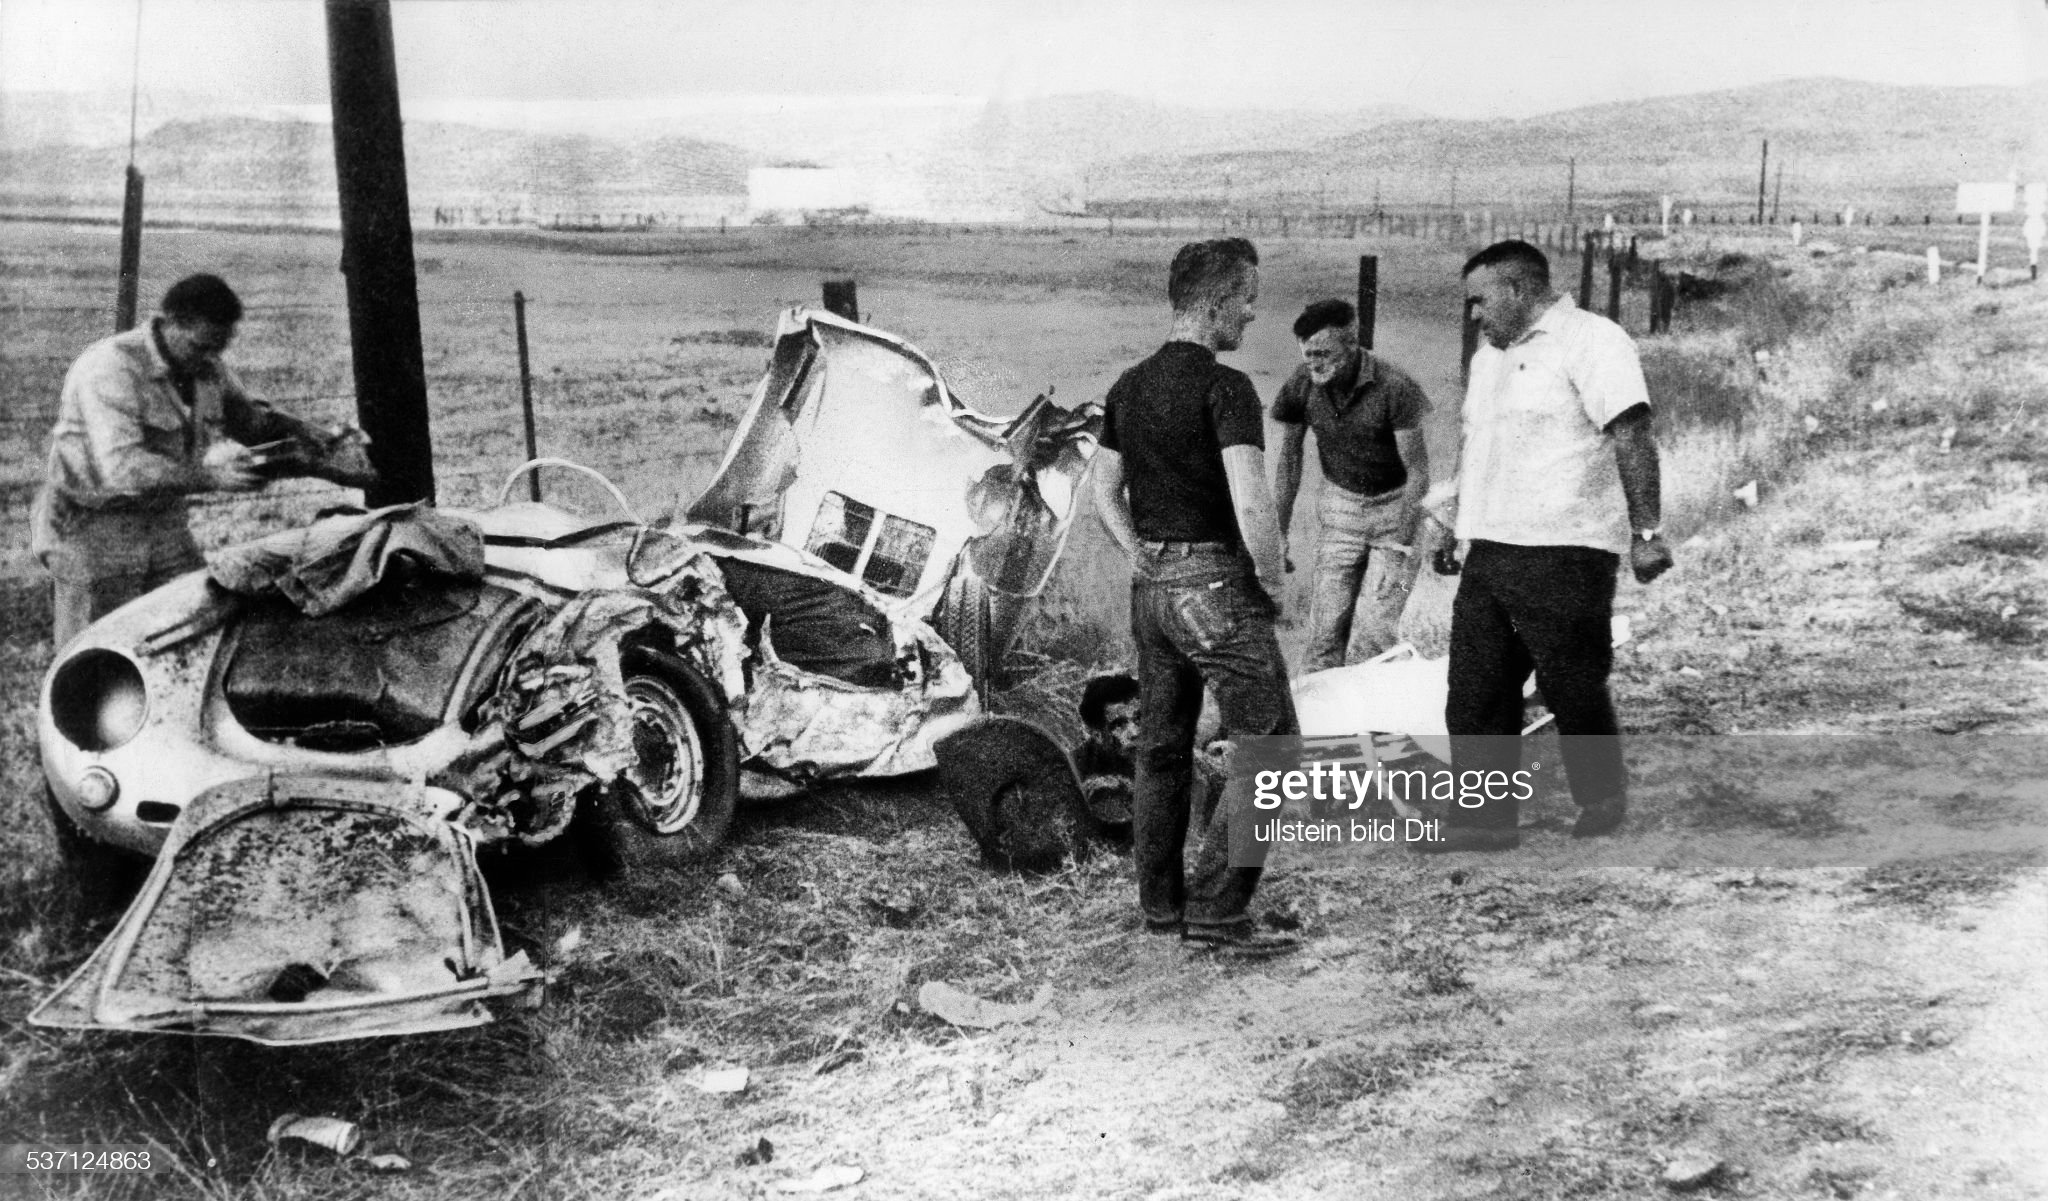 James Dean’s Porsche after the accident in 1955.